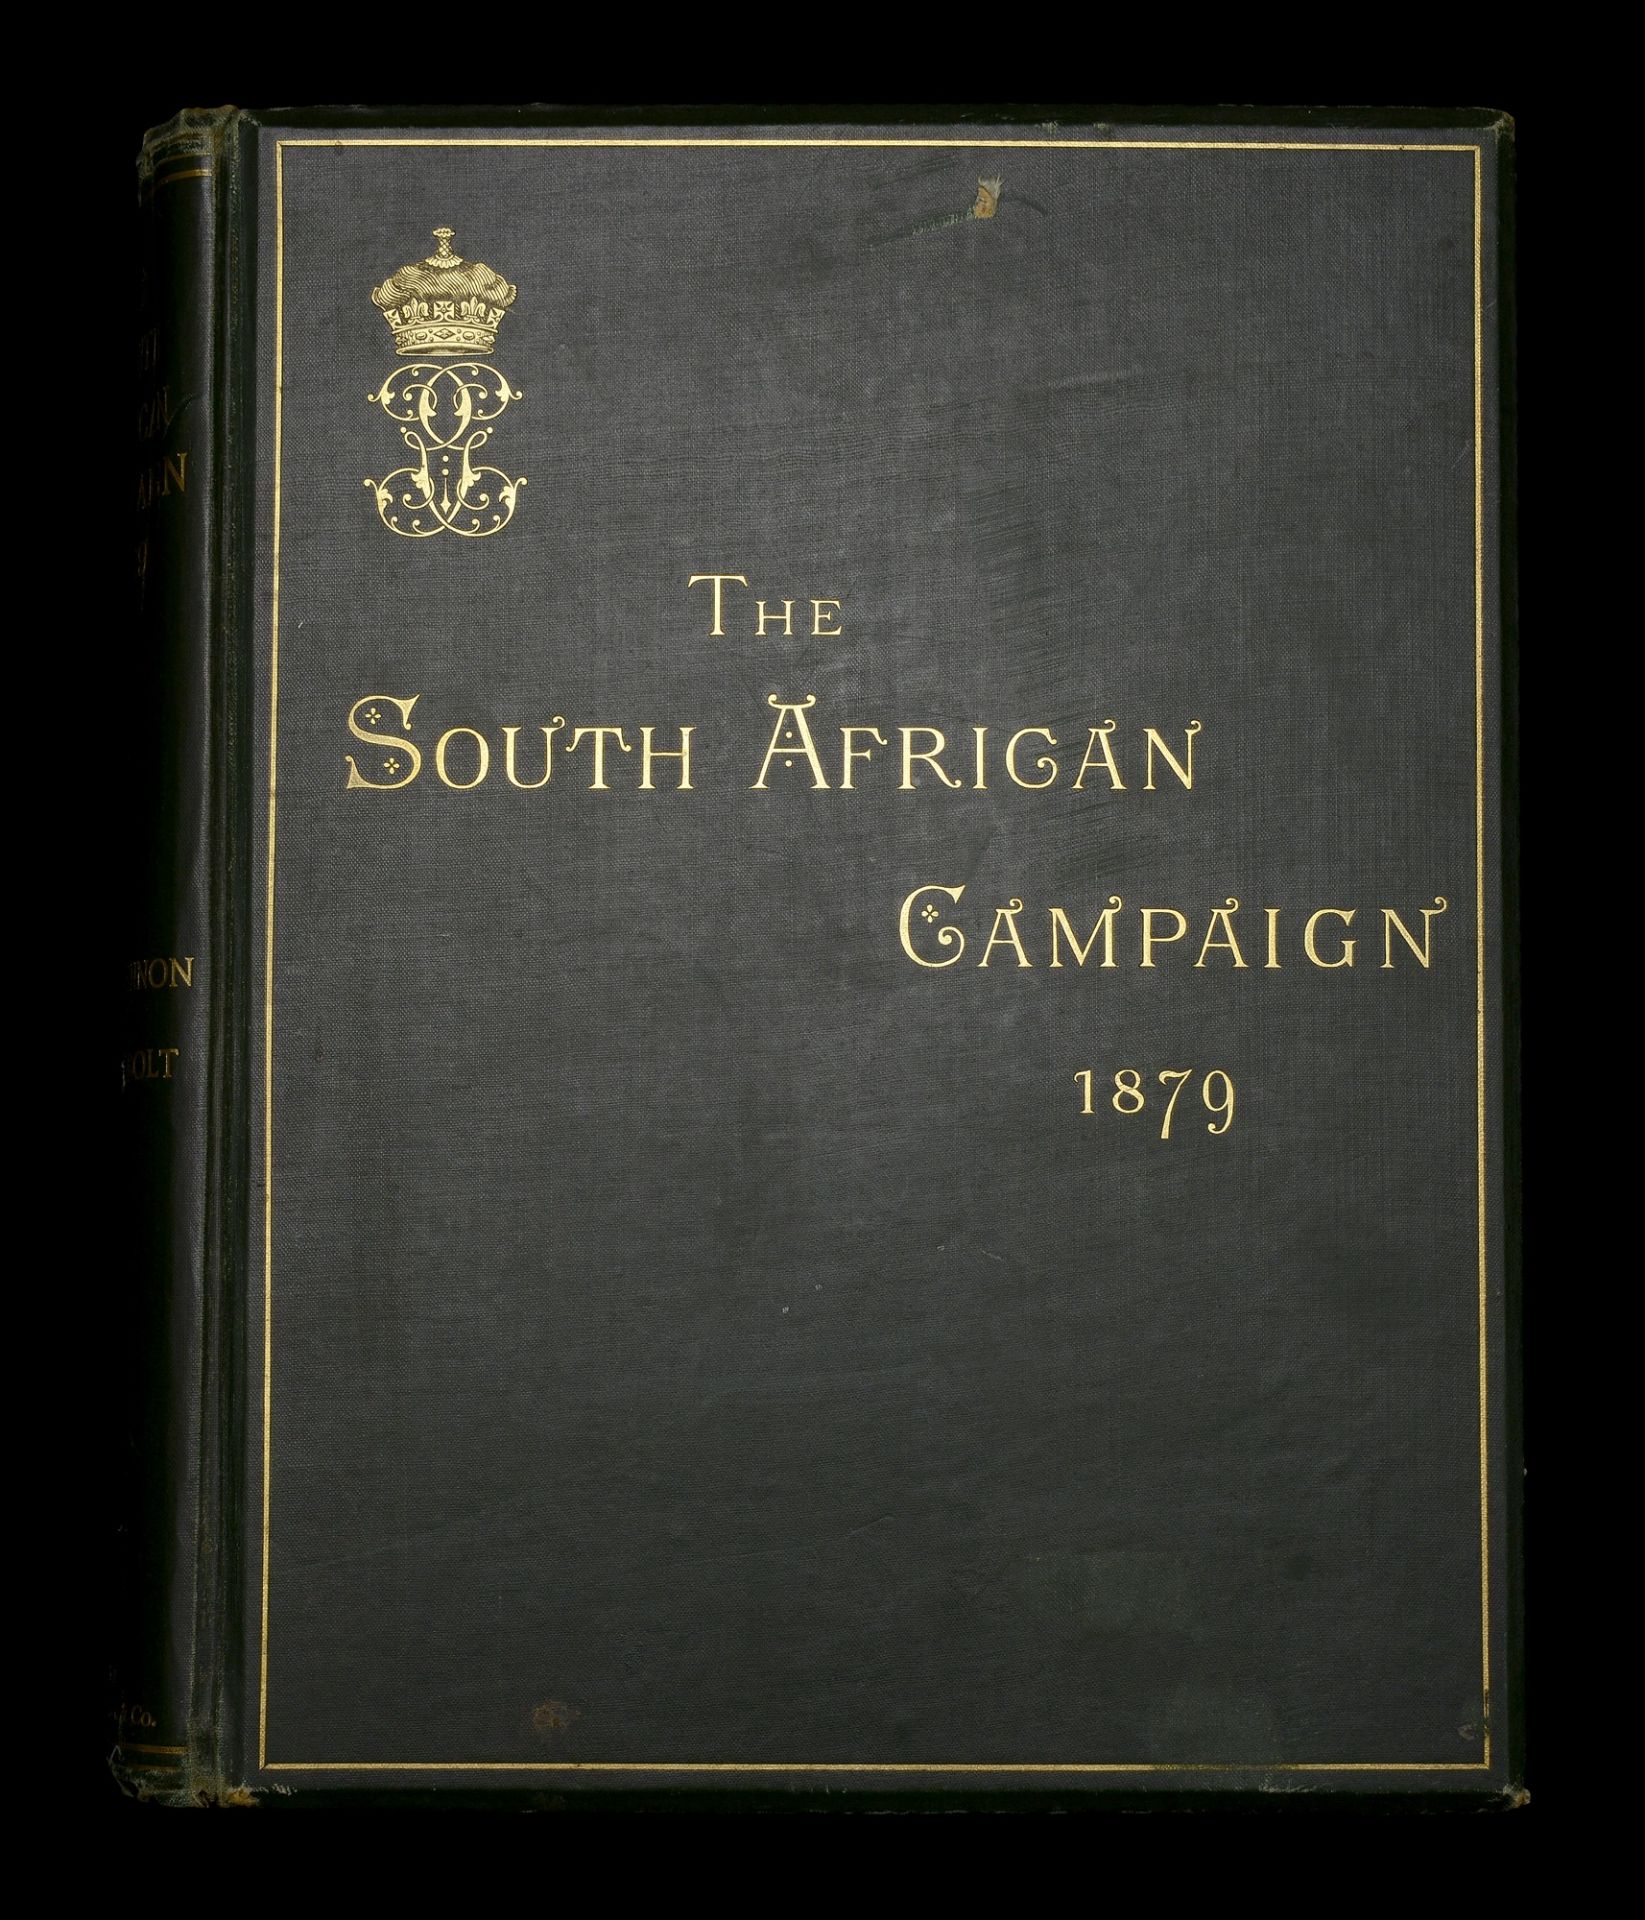 The South African Campaign 1879. By J. P. Mackinnon and S. H. Shadbolt, published by Sampso...